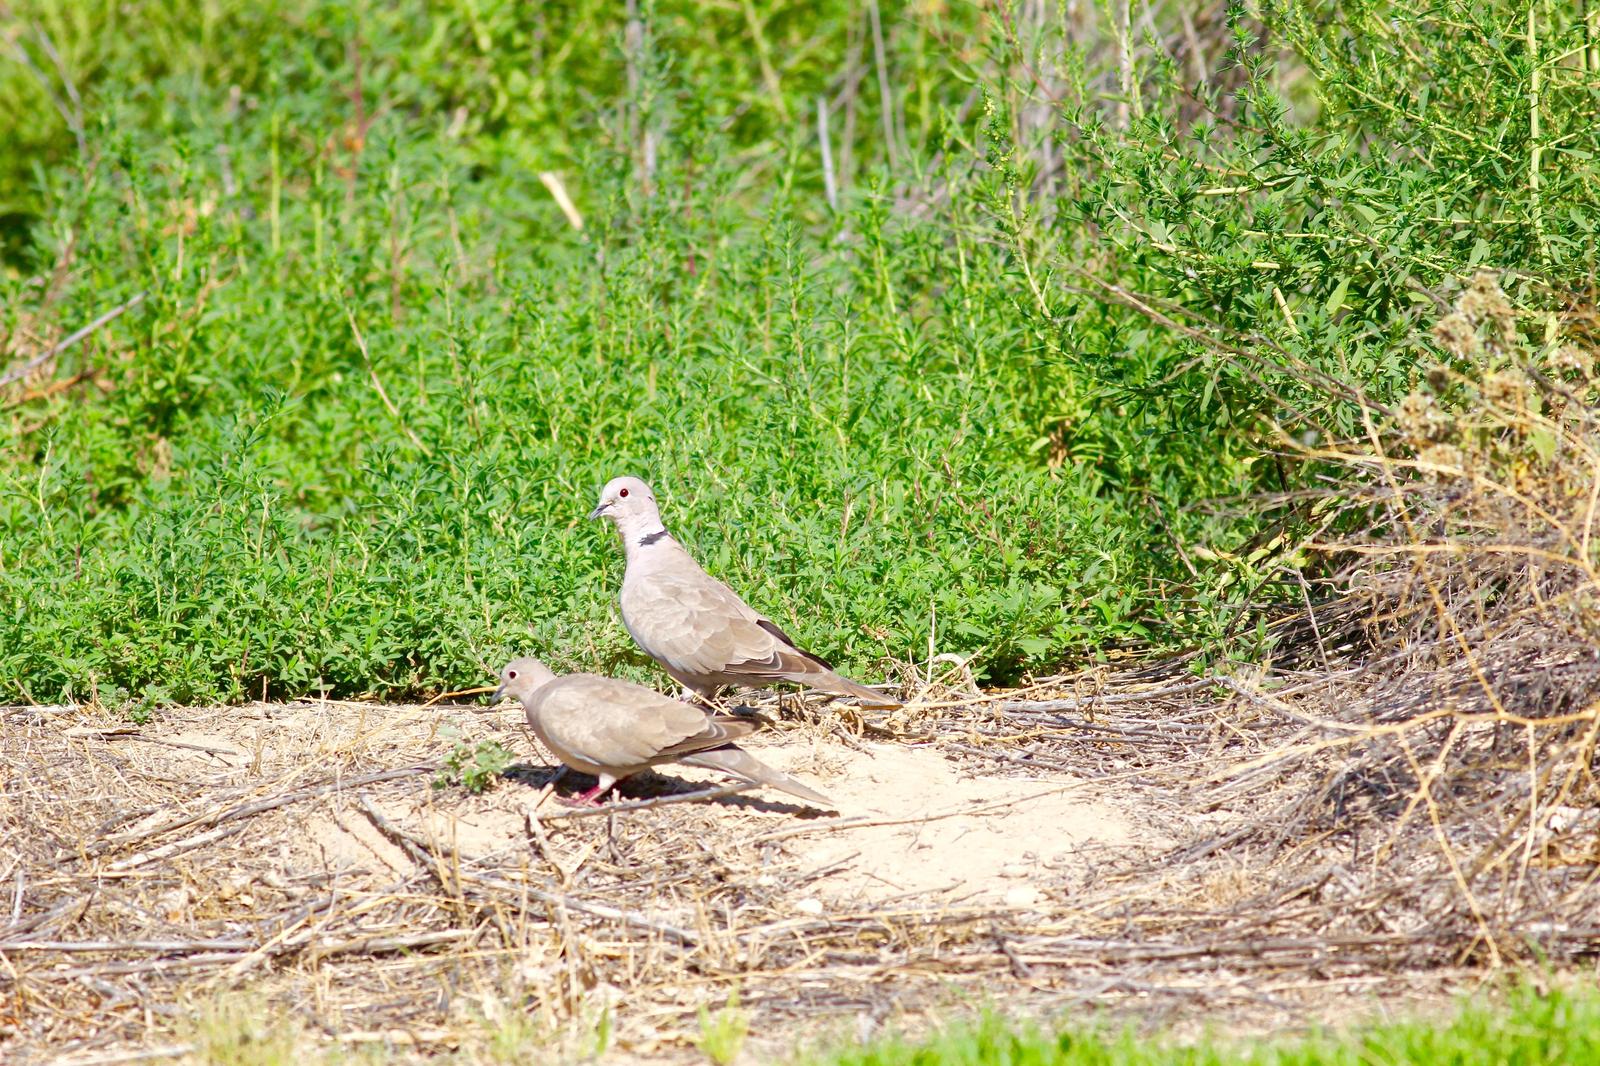 Eurasian Collared-Dove Photo by Kathryn Keith